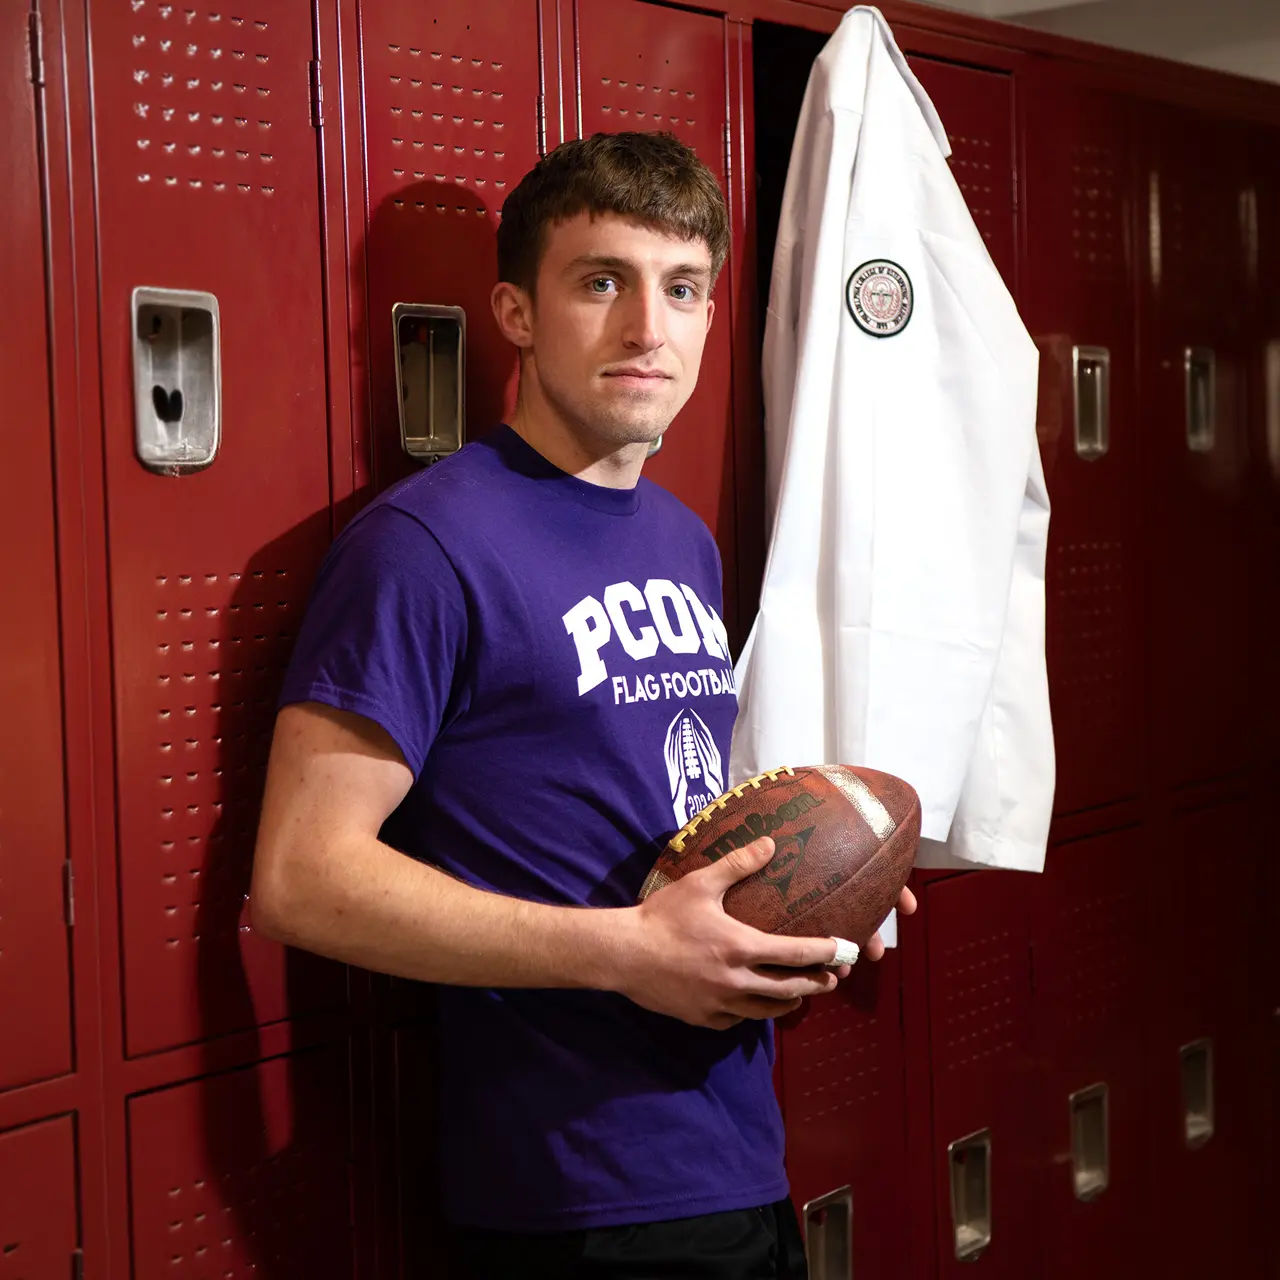 PCOM med student Adam Laudenslager (DO '25) holds a football in front of a locker